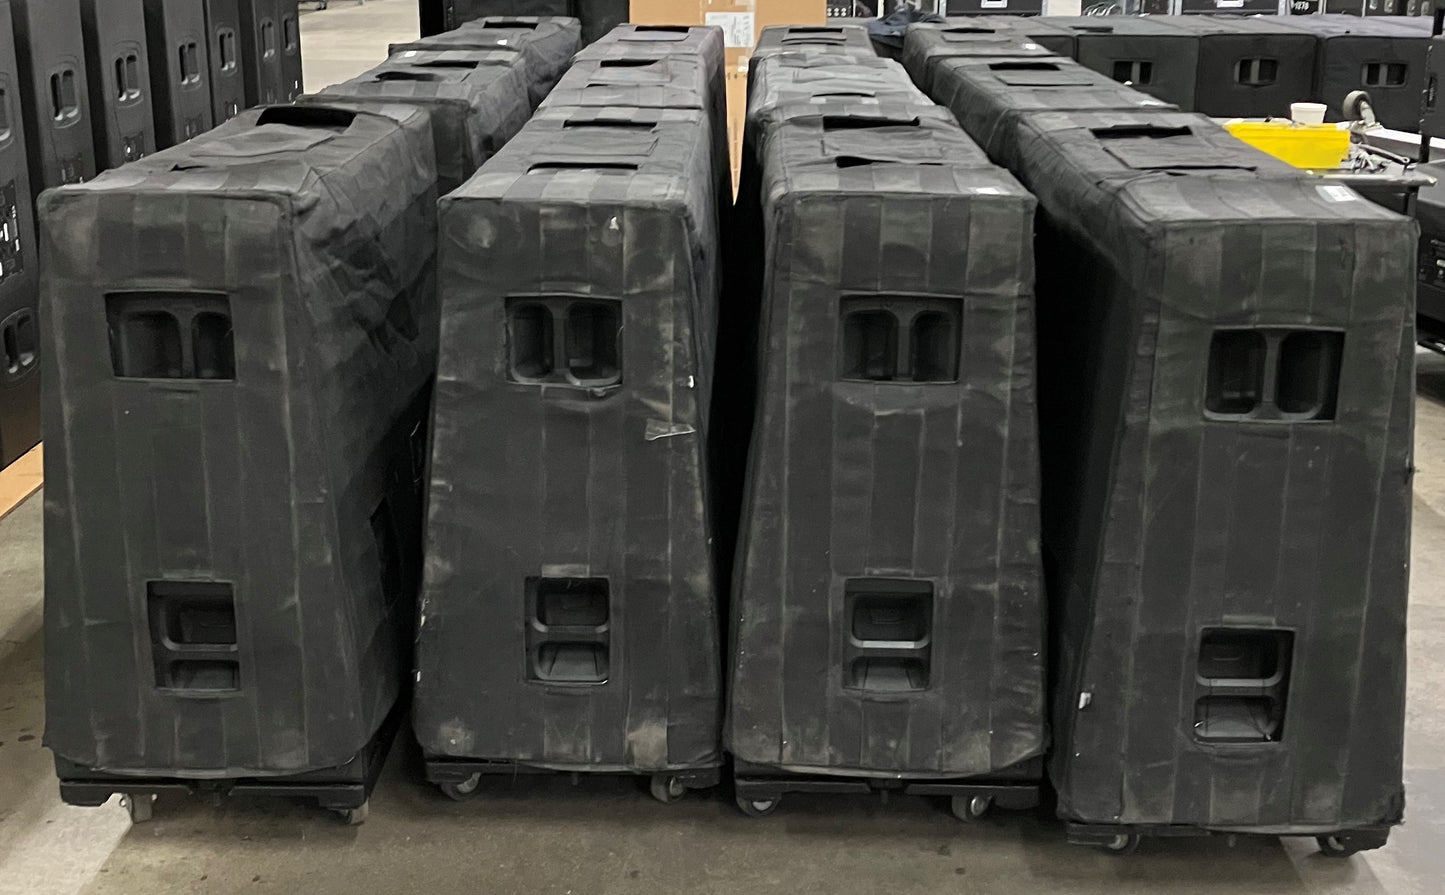 Used JBL VTX S28 subs for Sale.					We Sell Professional Audio Equipment. Audio Systems, Amplifiers, Consoles, Mixers, Electronics, Entertainment, Sound, Live.